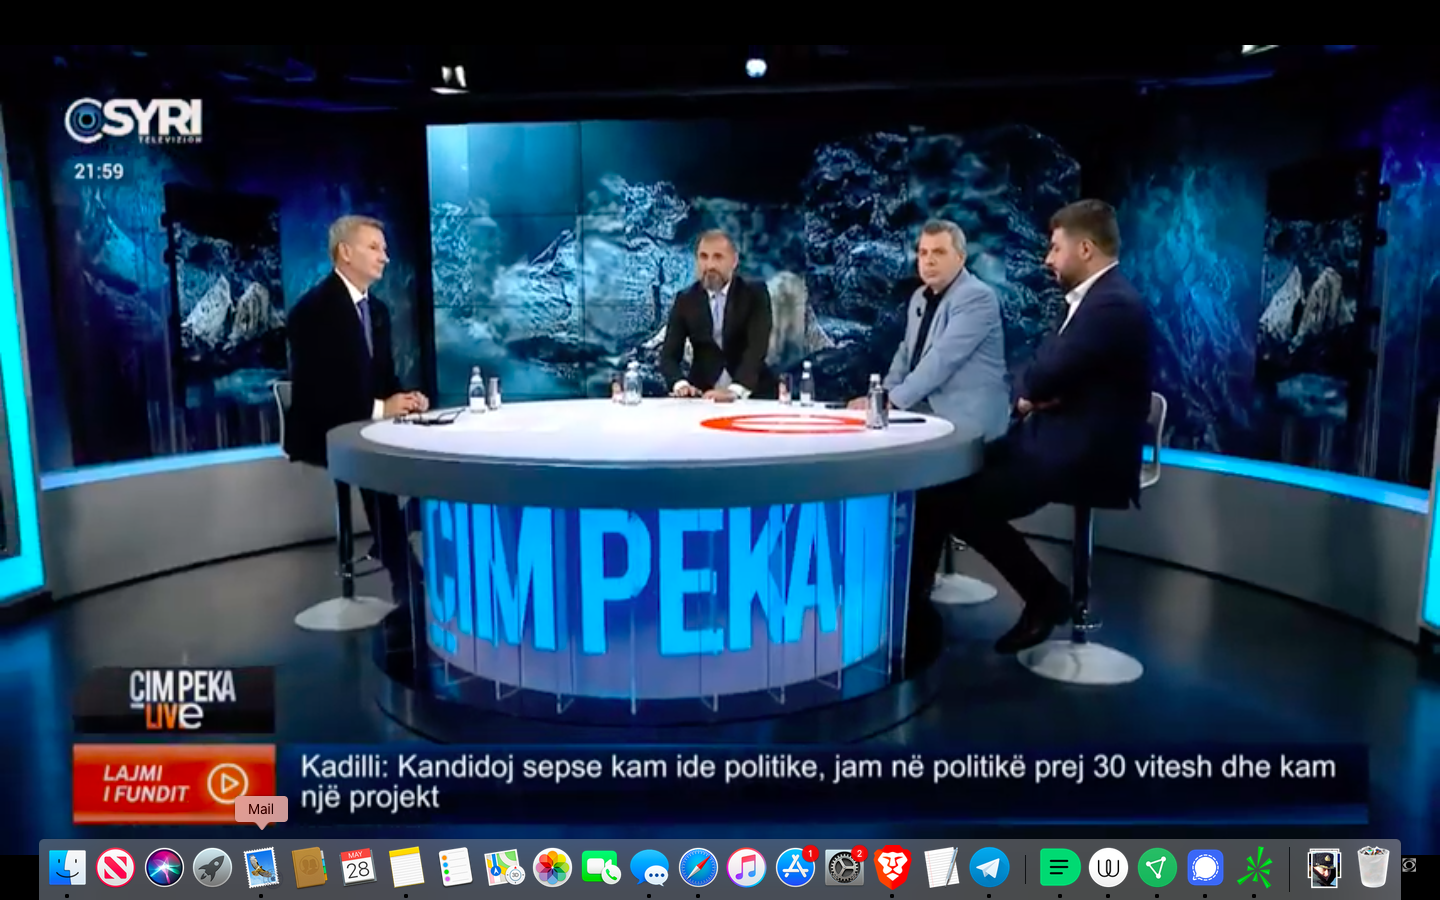 CDMedia Founder L Todd Wood Appears On Albanian TV To Discuss November Coup